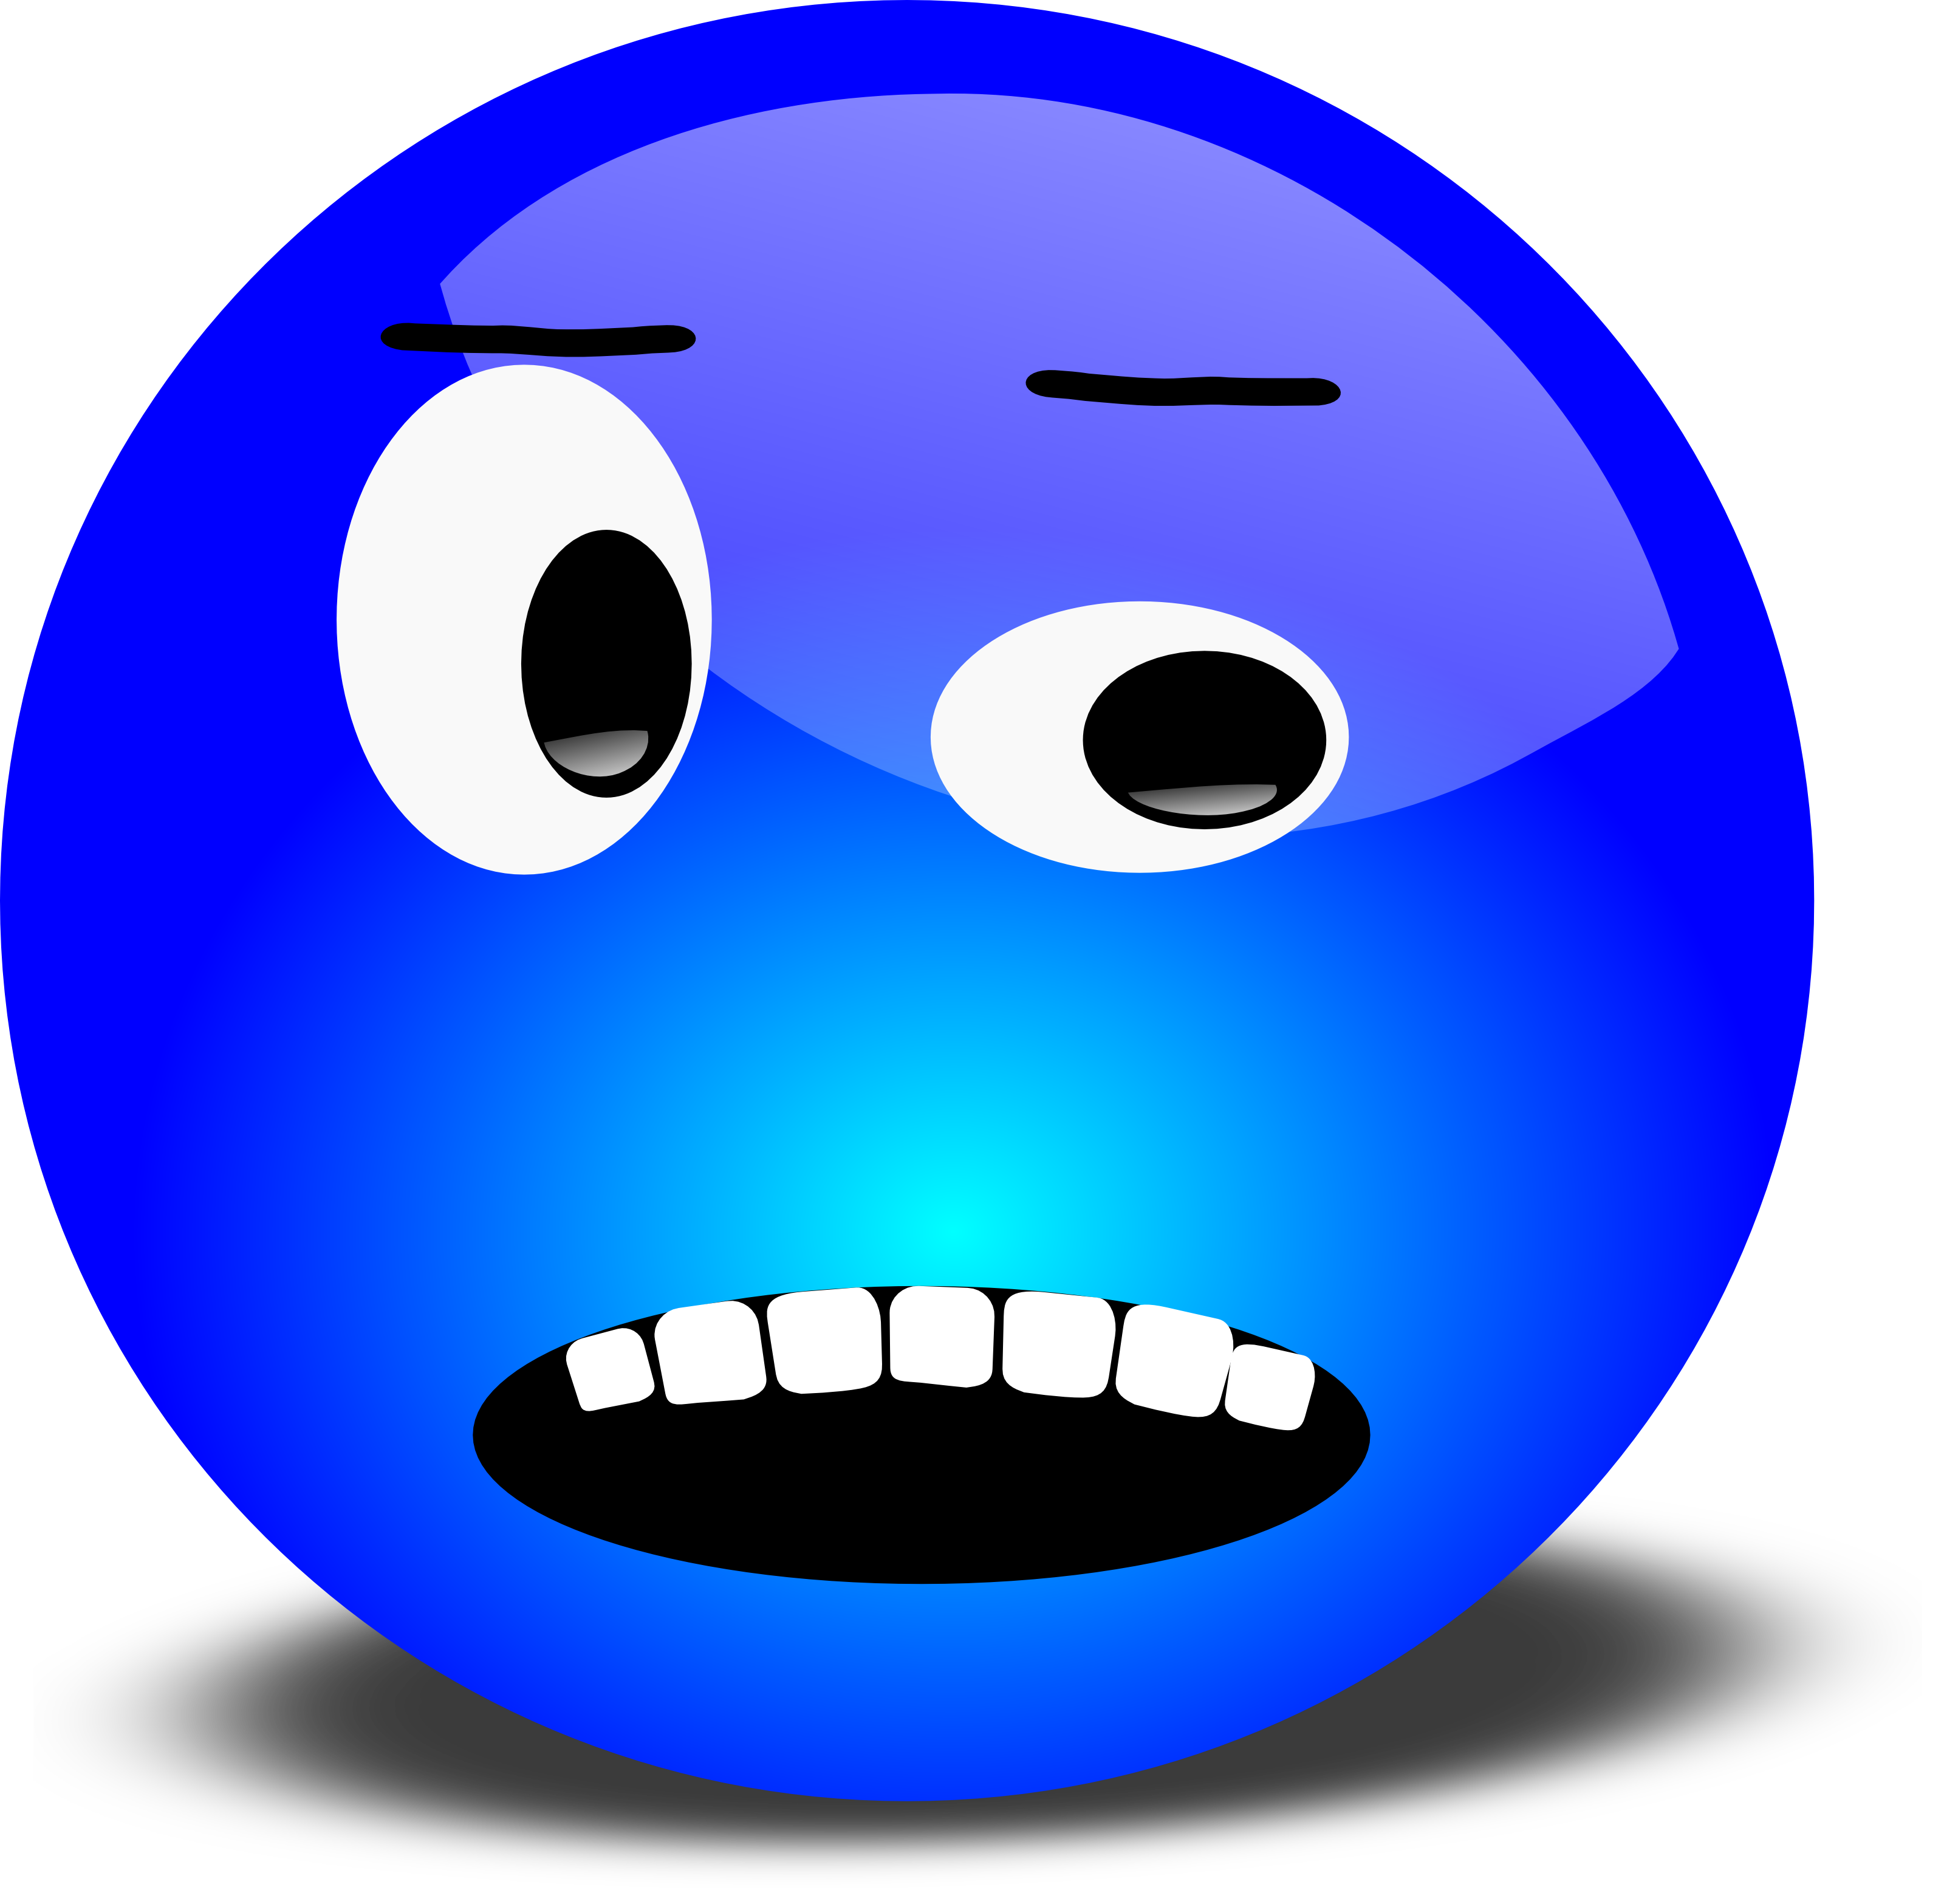 Free 3D Annoyed Smiley Face Clipart Illustration.